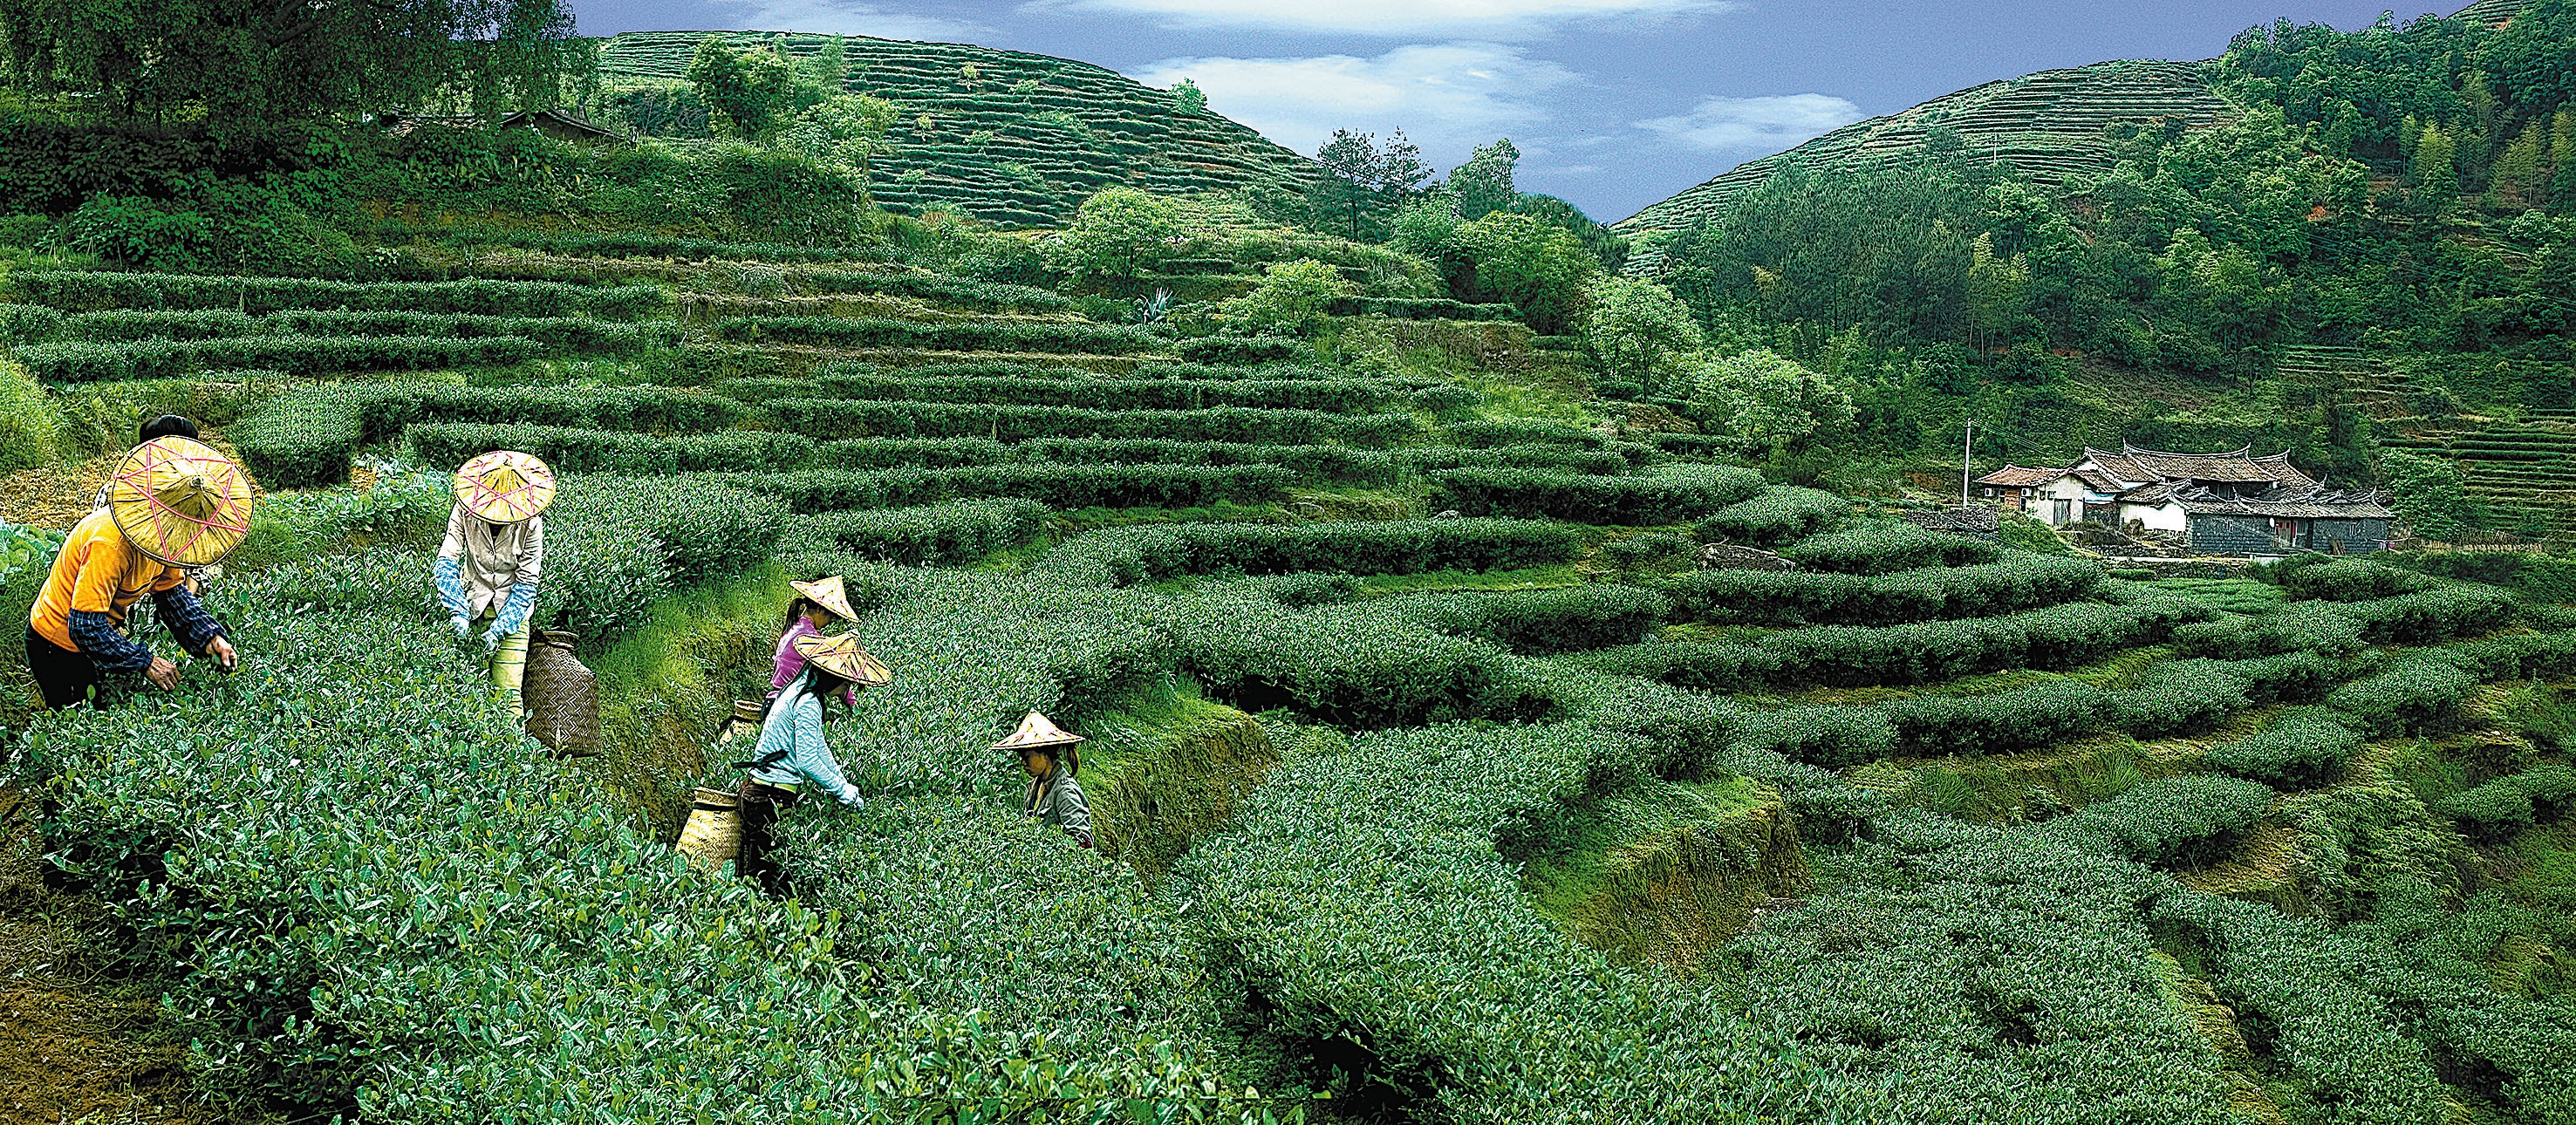 Farmers pick Tieguanyin tea leaves on a hillside in Anxi, Fujian province, which has been recognised by the UN as an agricultural heritage site